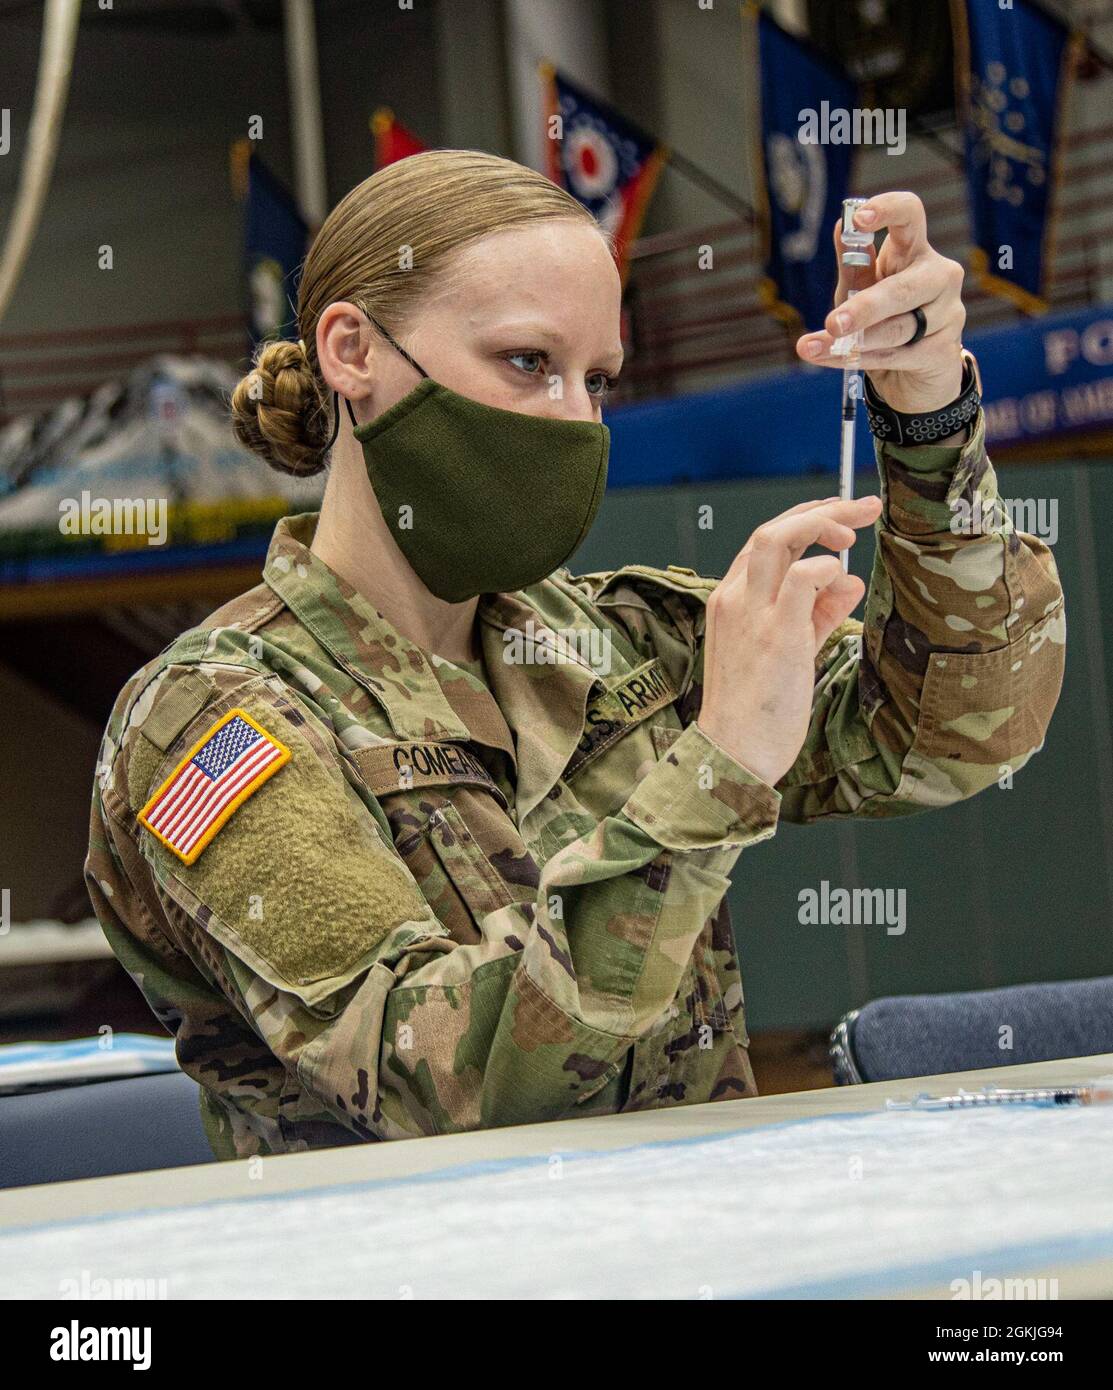 Pfc. Shannon Comeaux from Charlie Company, 210 Brigade Support Battalion, 2nd Brigade Combat Team, 10th Mountain Division (LI) carefully fills a syringe with COVID-19 vaccine at a vaccine dispersal site at Magrath gym on Fort Drum, May 3, 2021. Fort Drum Soldiers have been receiving COVID-19 vaccines in increasing numbers since initial vaccine dispersal. Stock Photo